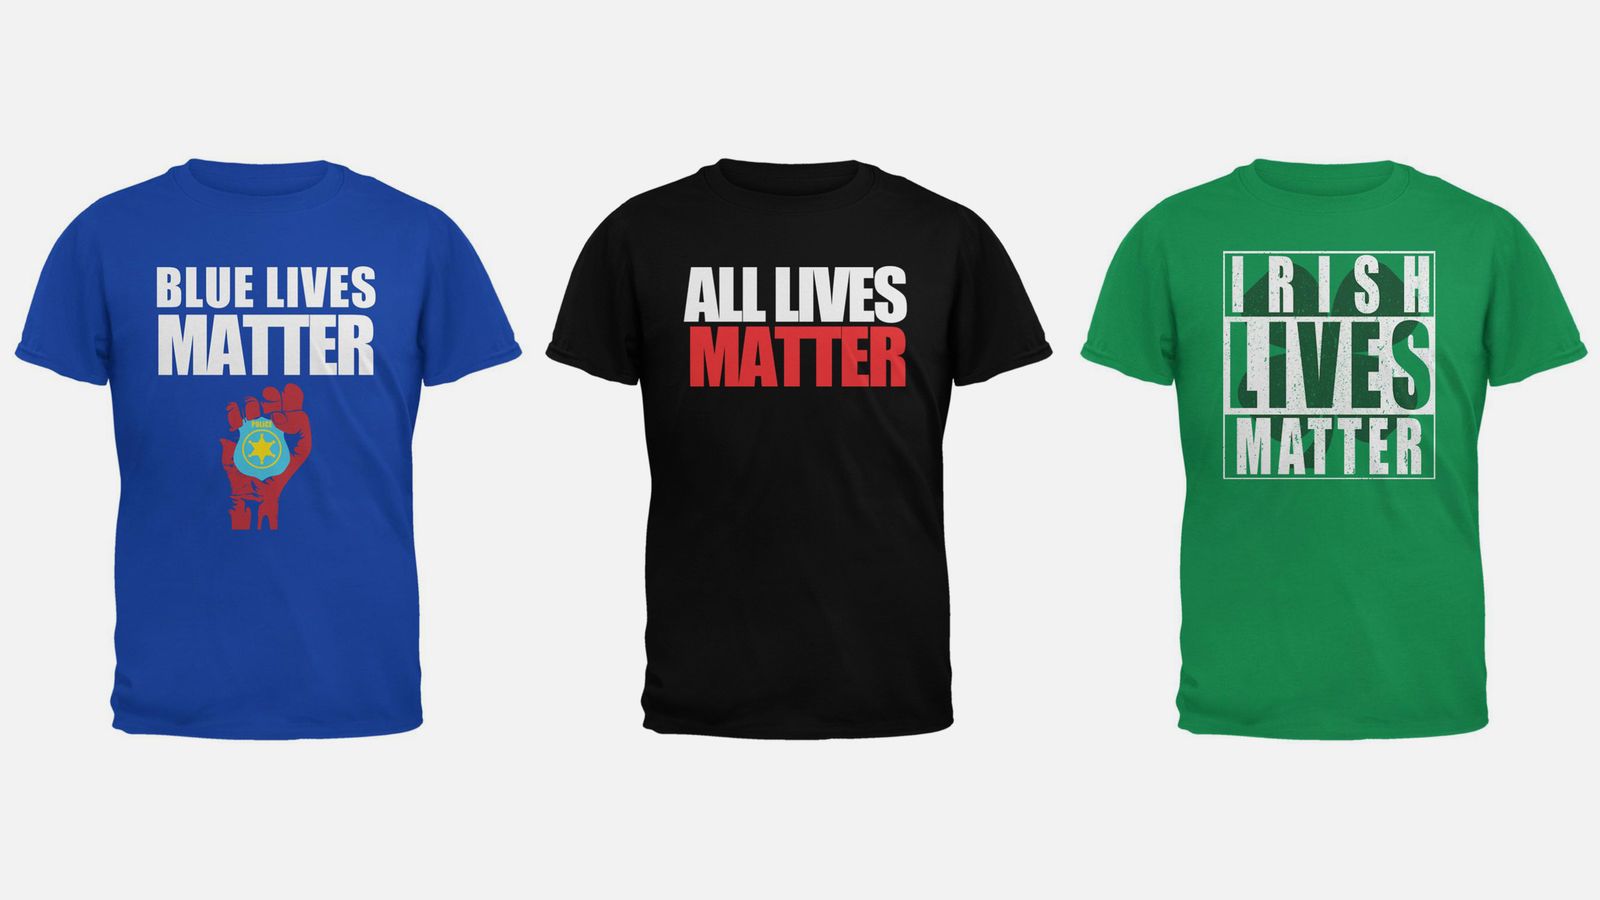 Walmart faces backlash over T-shirts "All Live Matter" and Live Matter" | Business